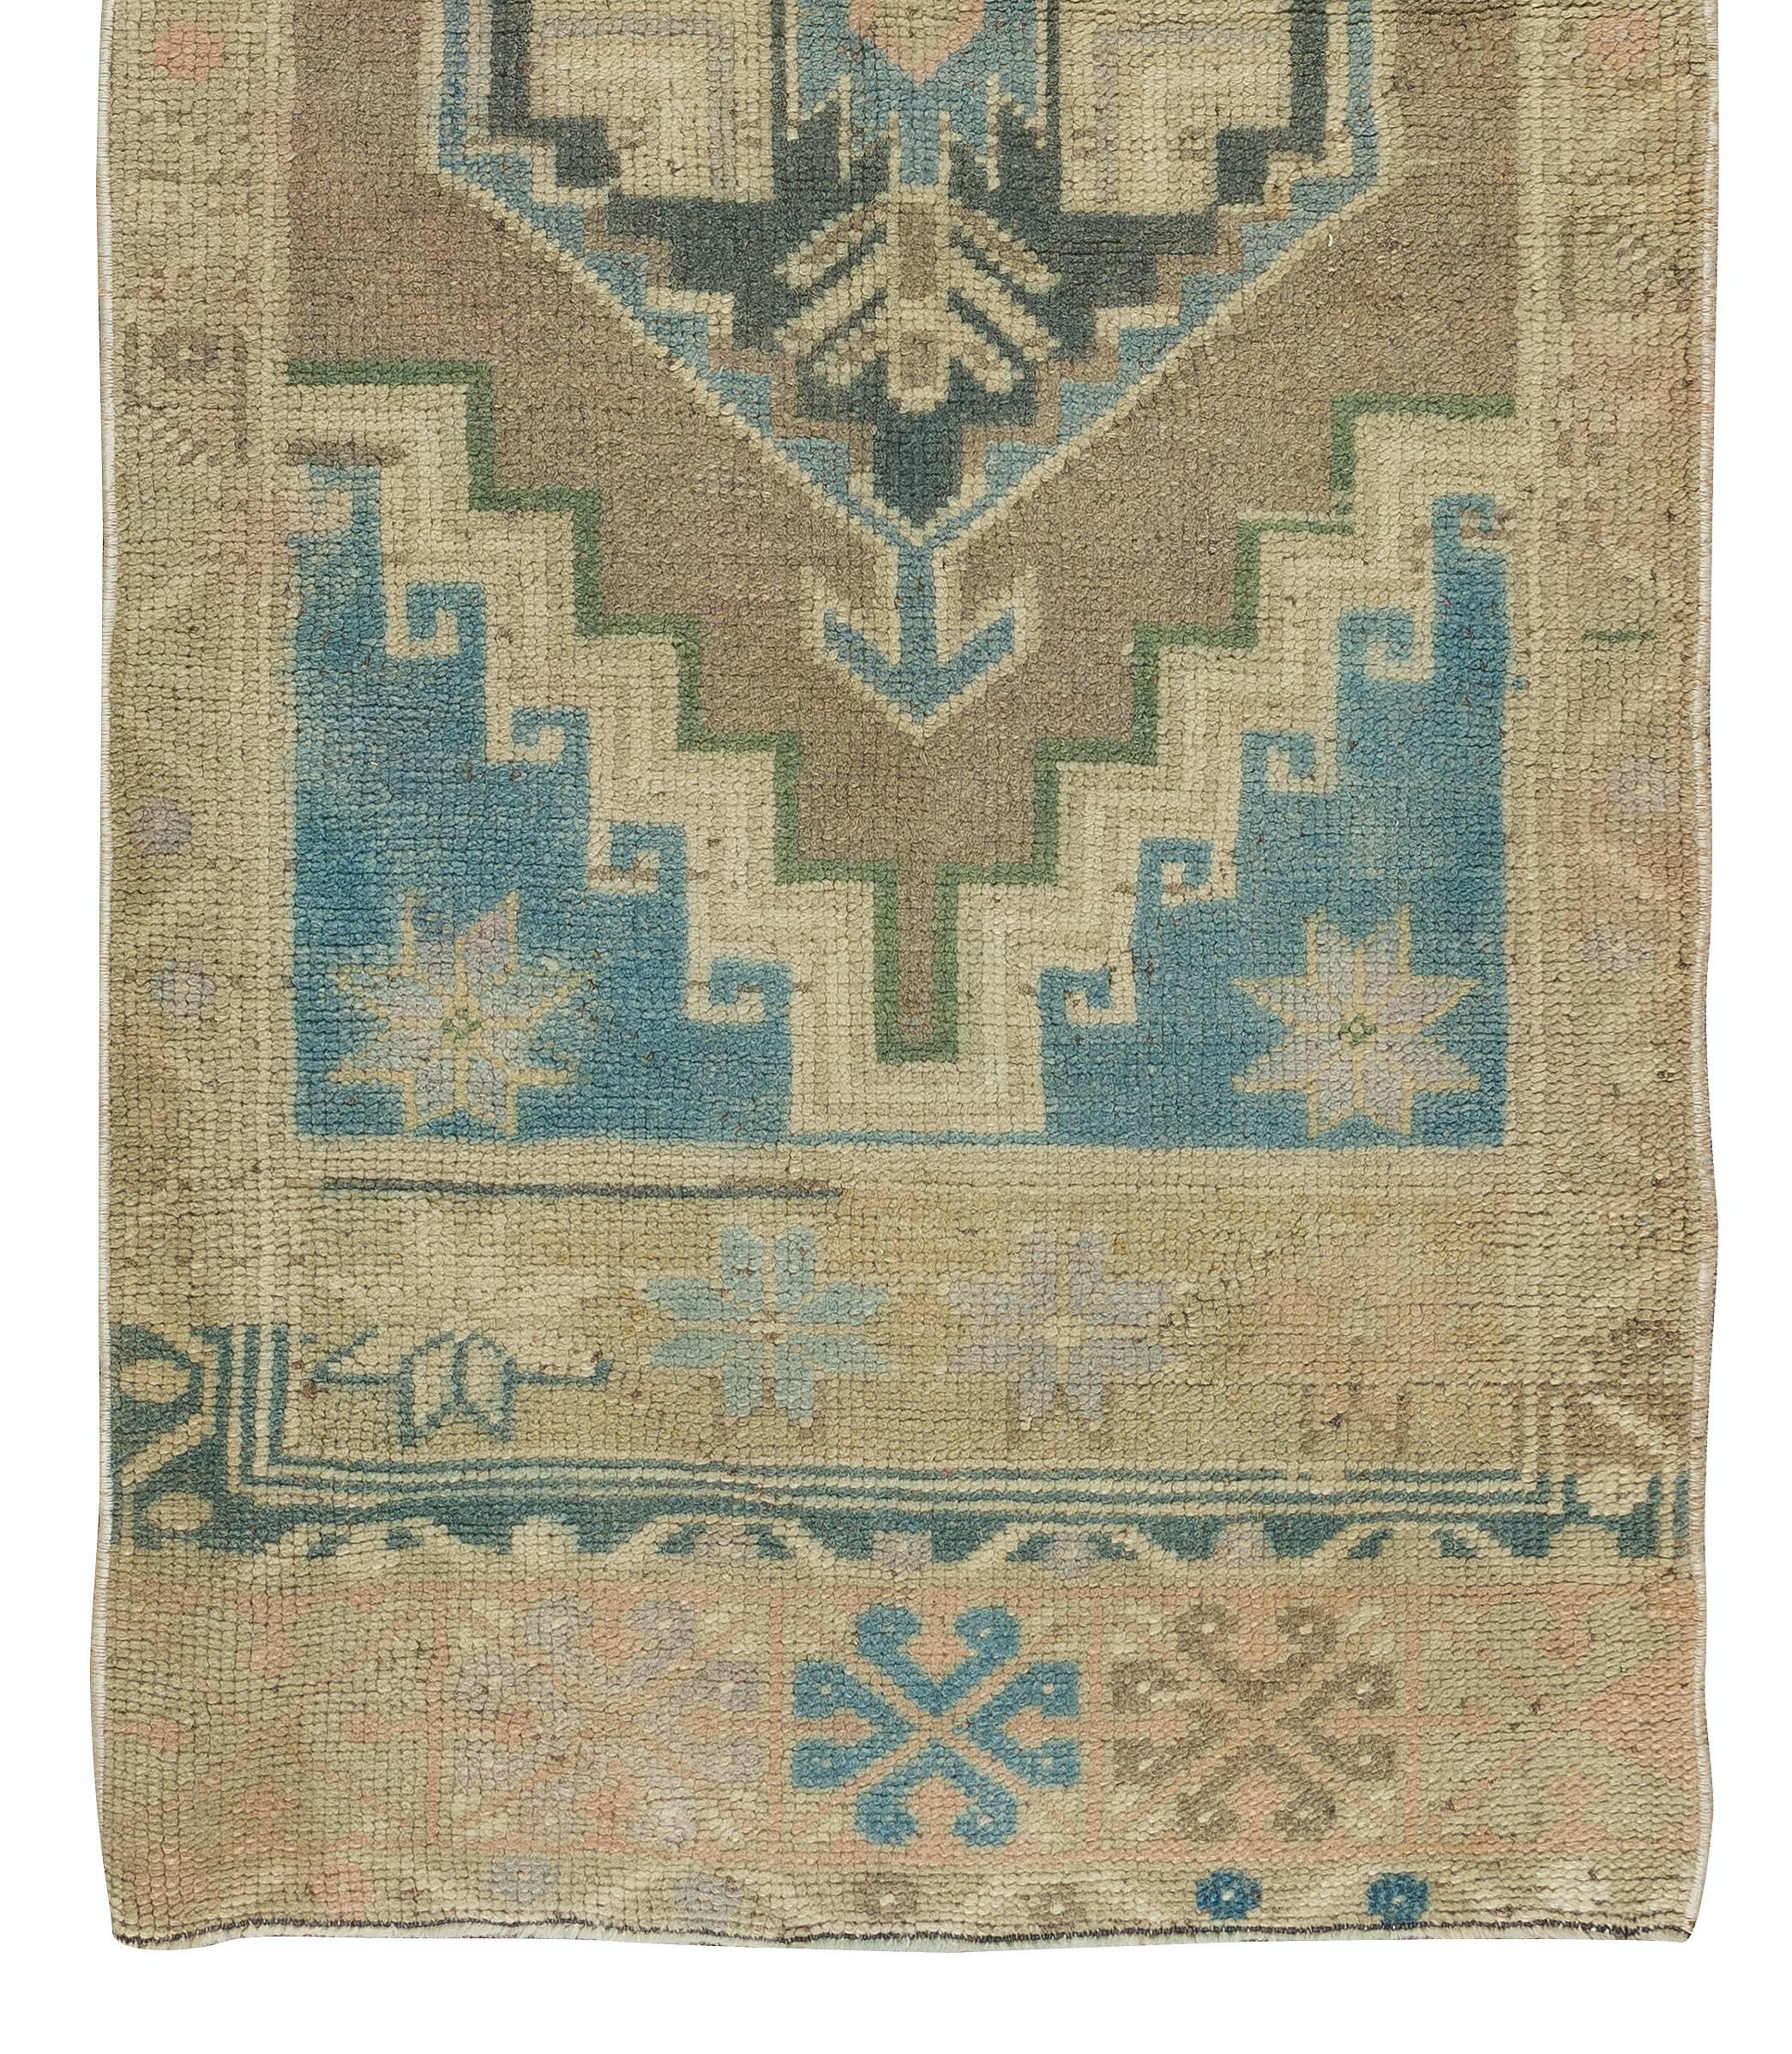 20th Century 2.4x5.9 Ft Tribal Hand-Knotted Oriental Rug, Vintage Small Runner from Turkey